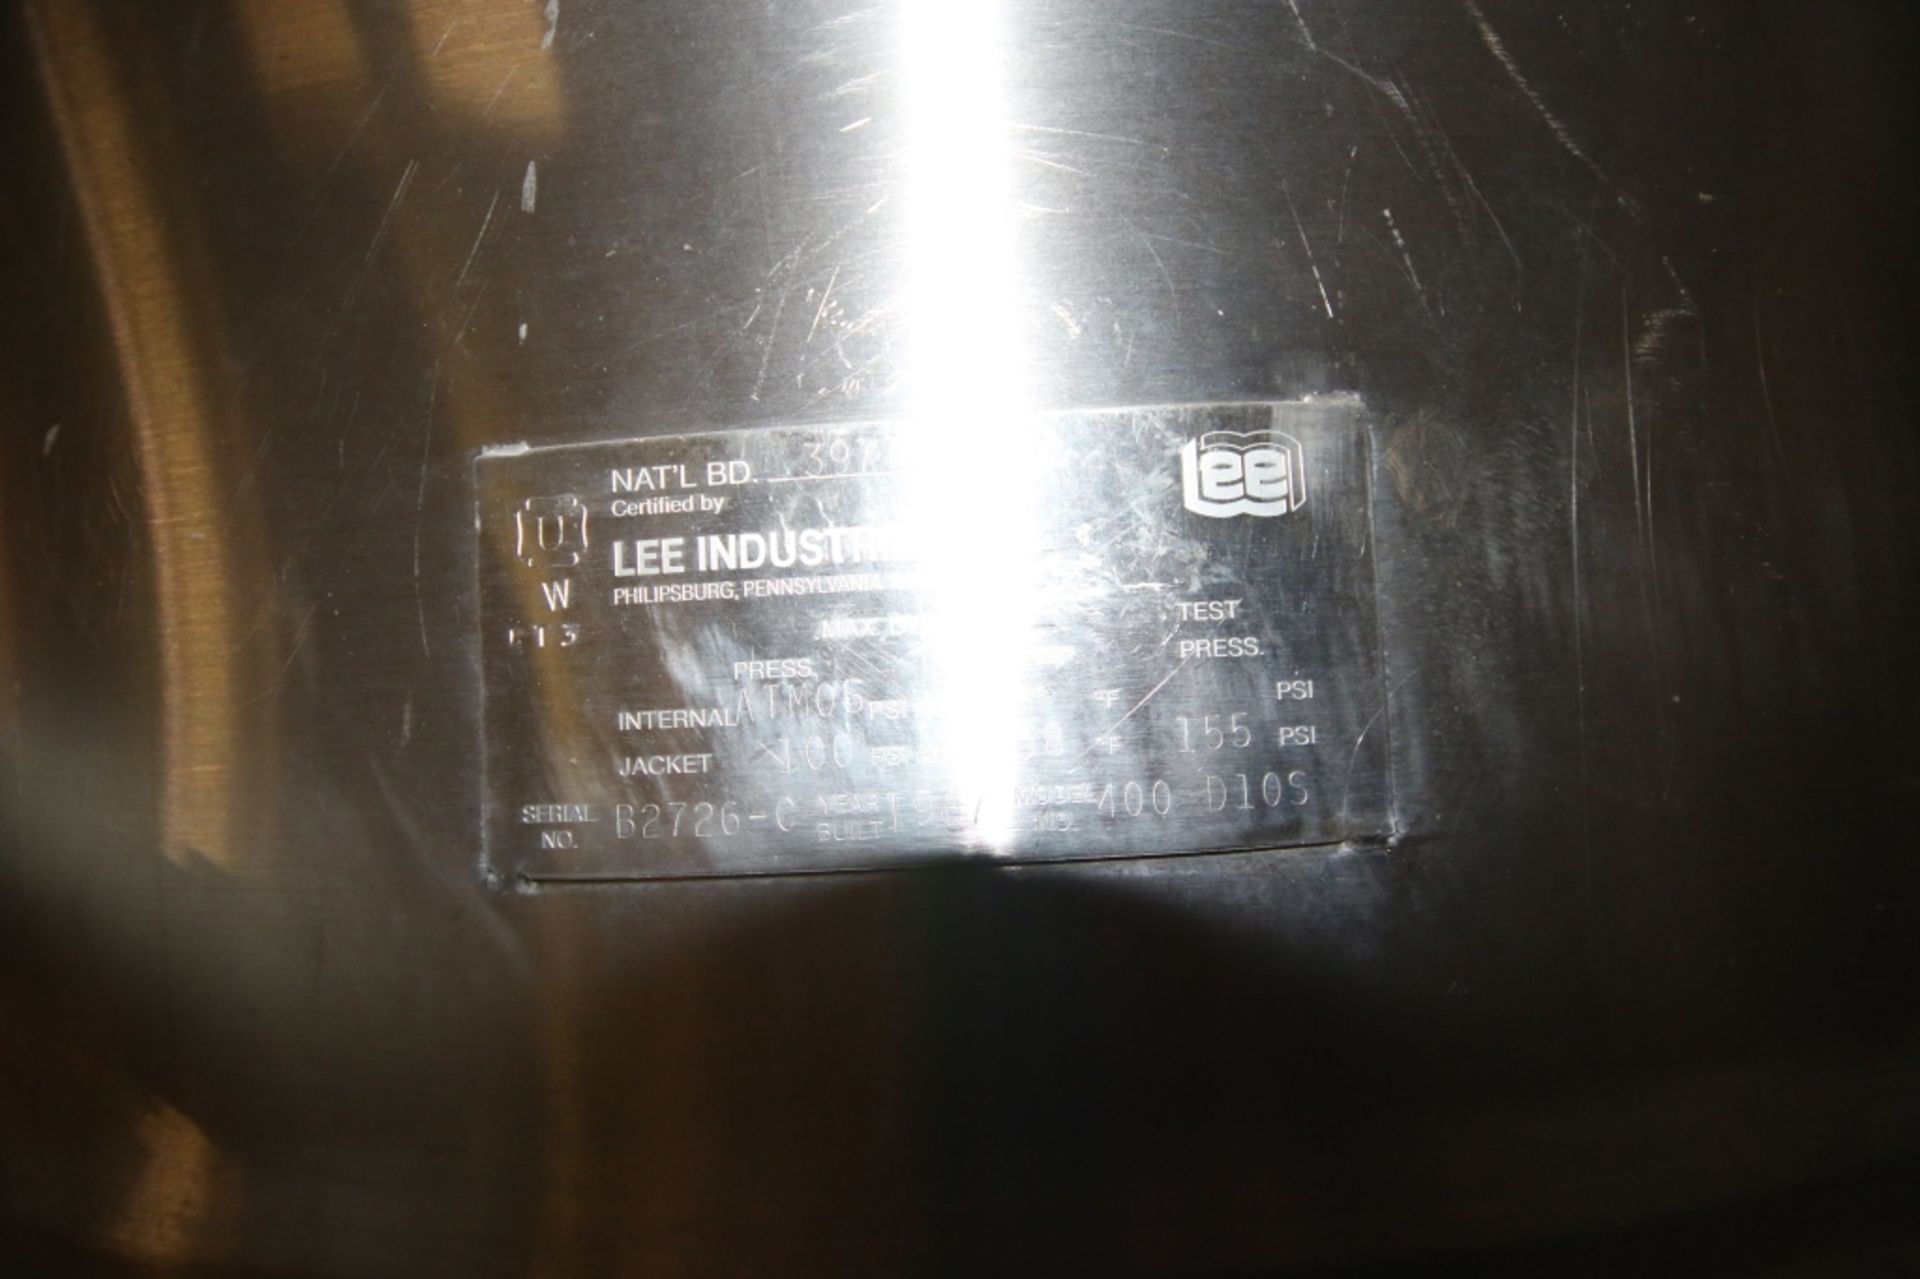 Lee 400 Gal. S/S Kettle,M/N 400 D10S, S/N B2726-C, Jacket 100 PSI @ 338 F 155 PSI, with Top - Image 9 of 13